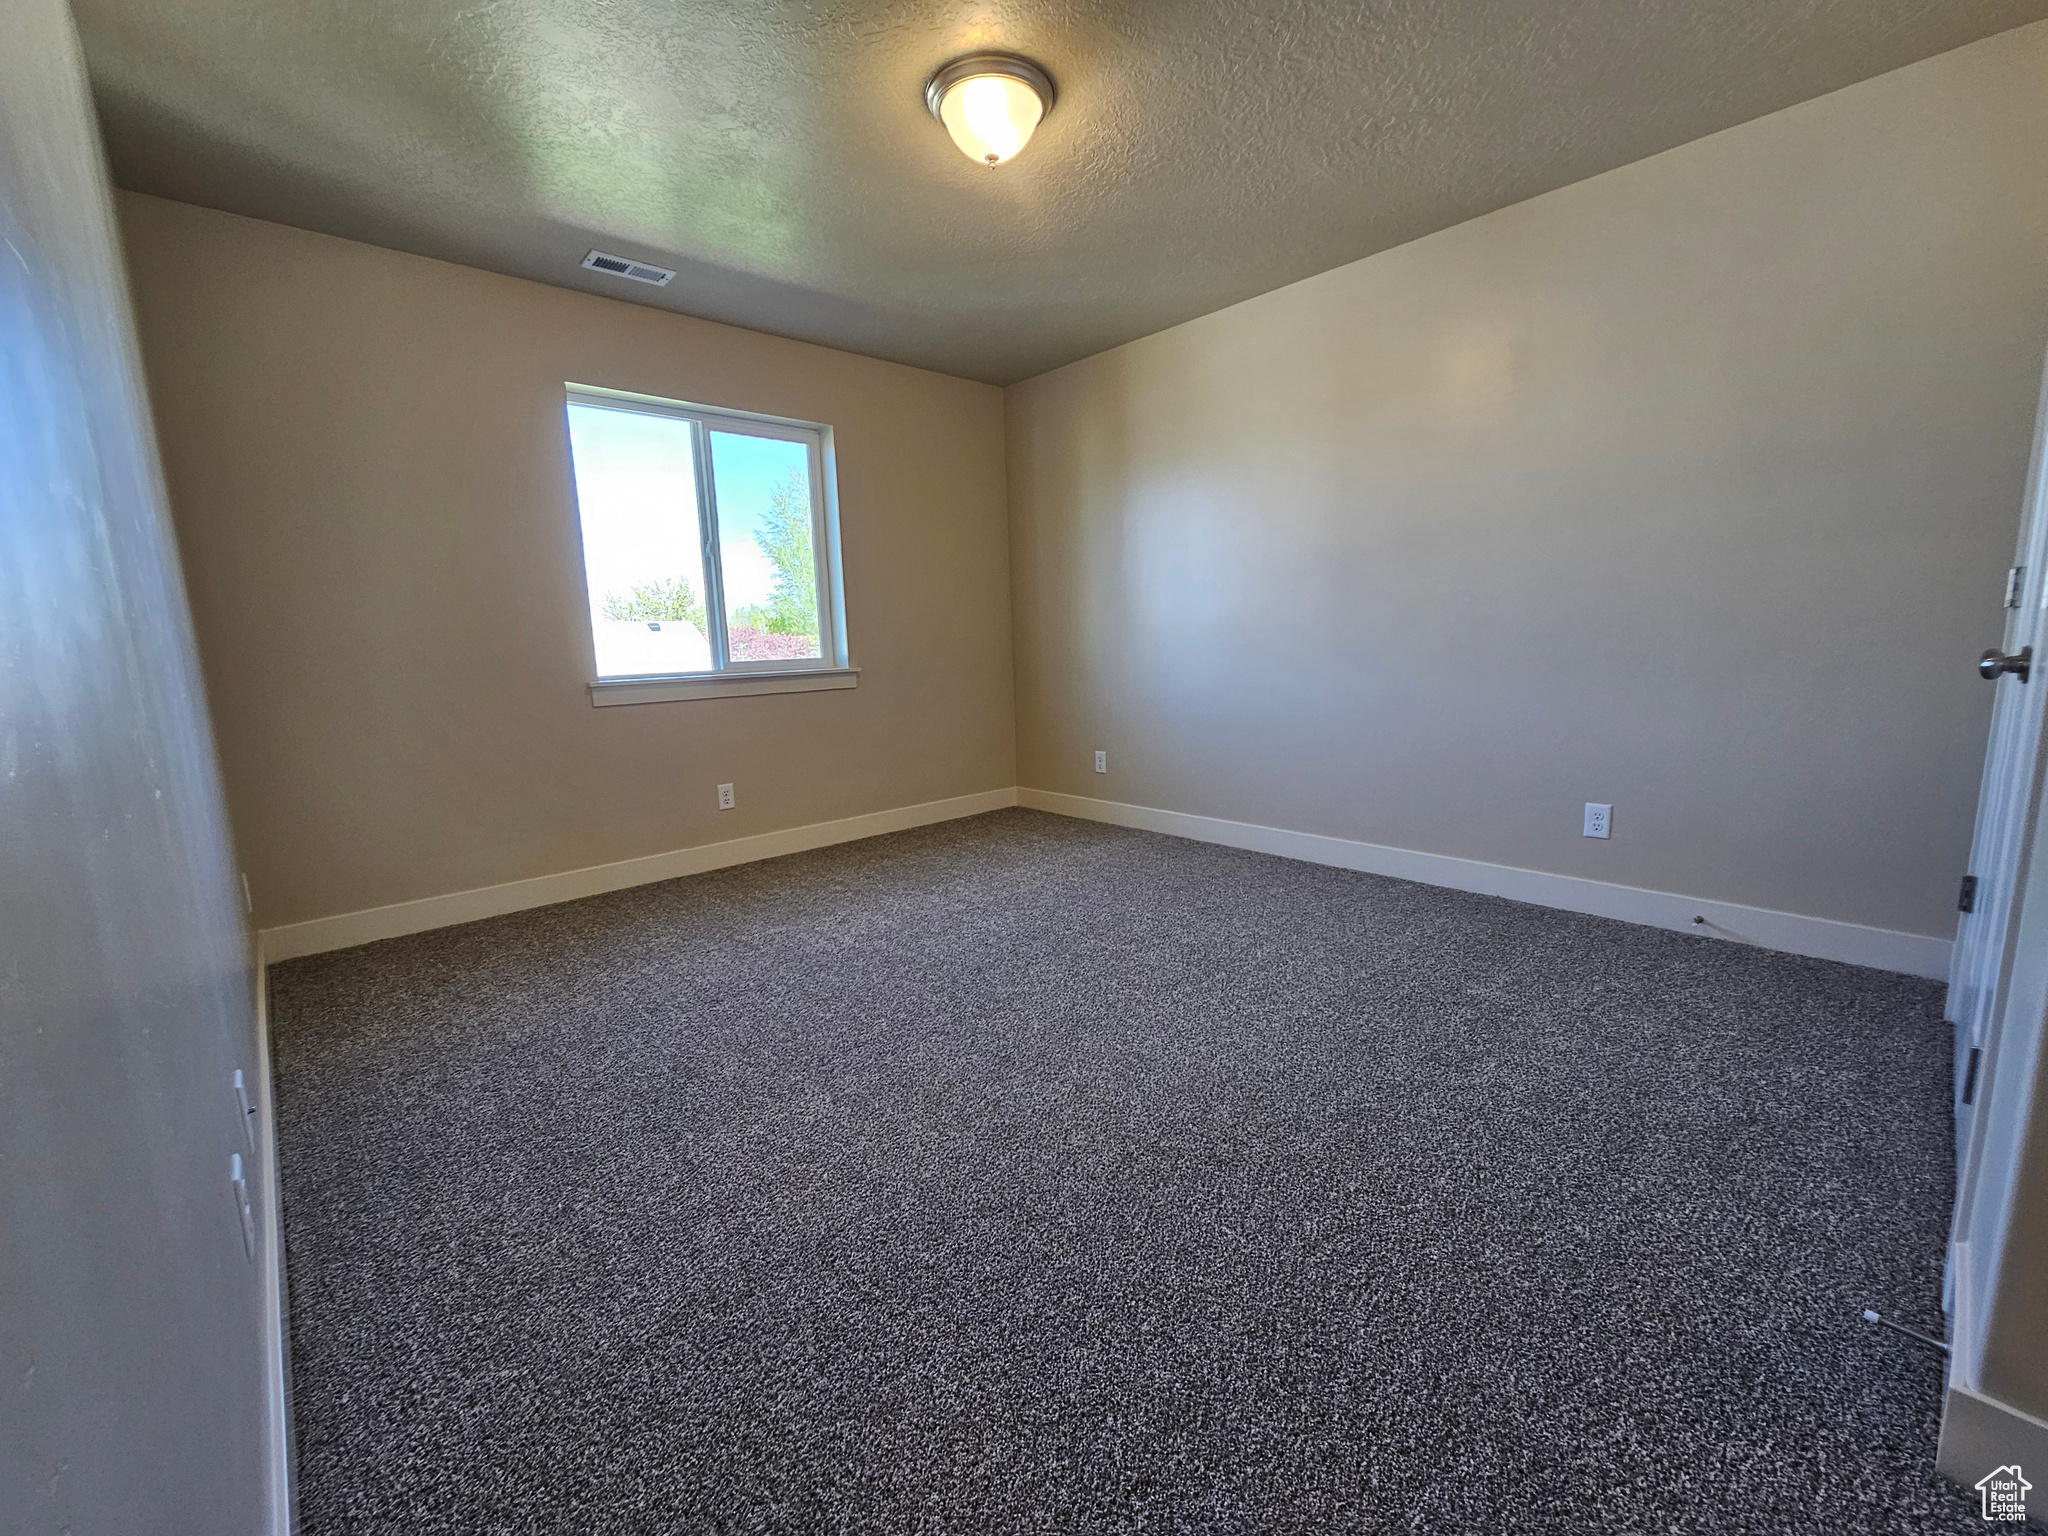 Spare room featuring a textured ceiling and dark colored carpet